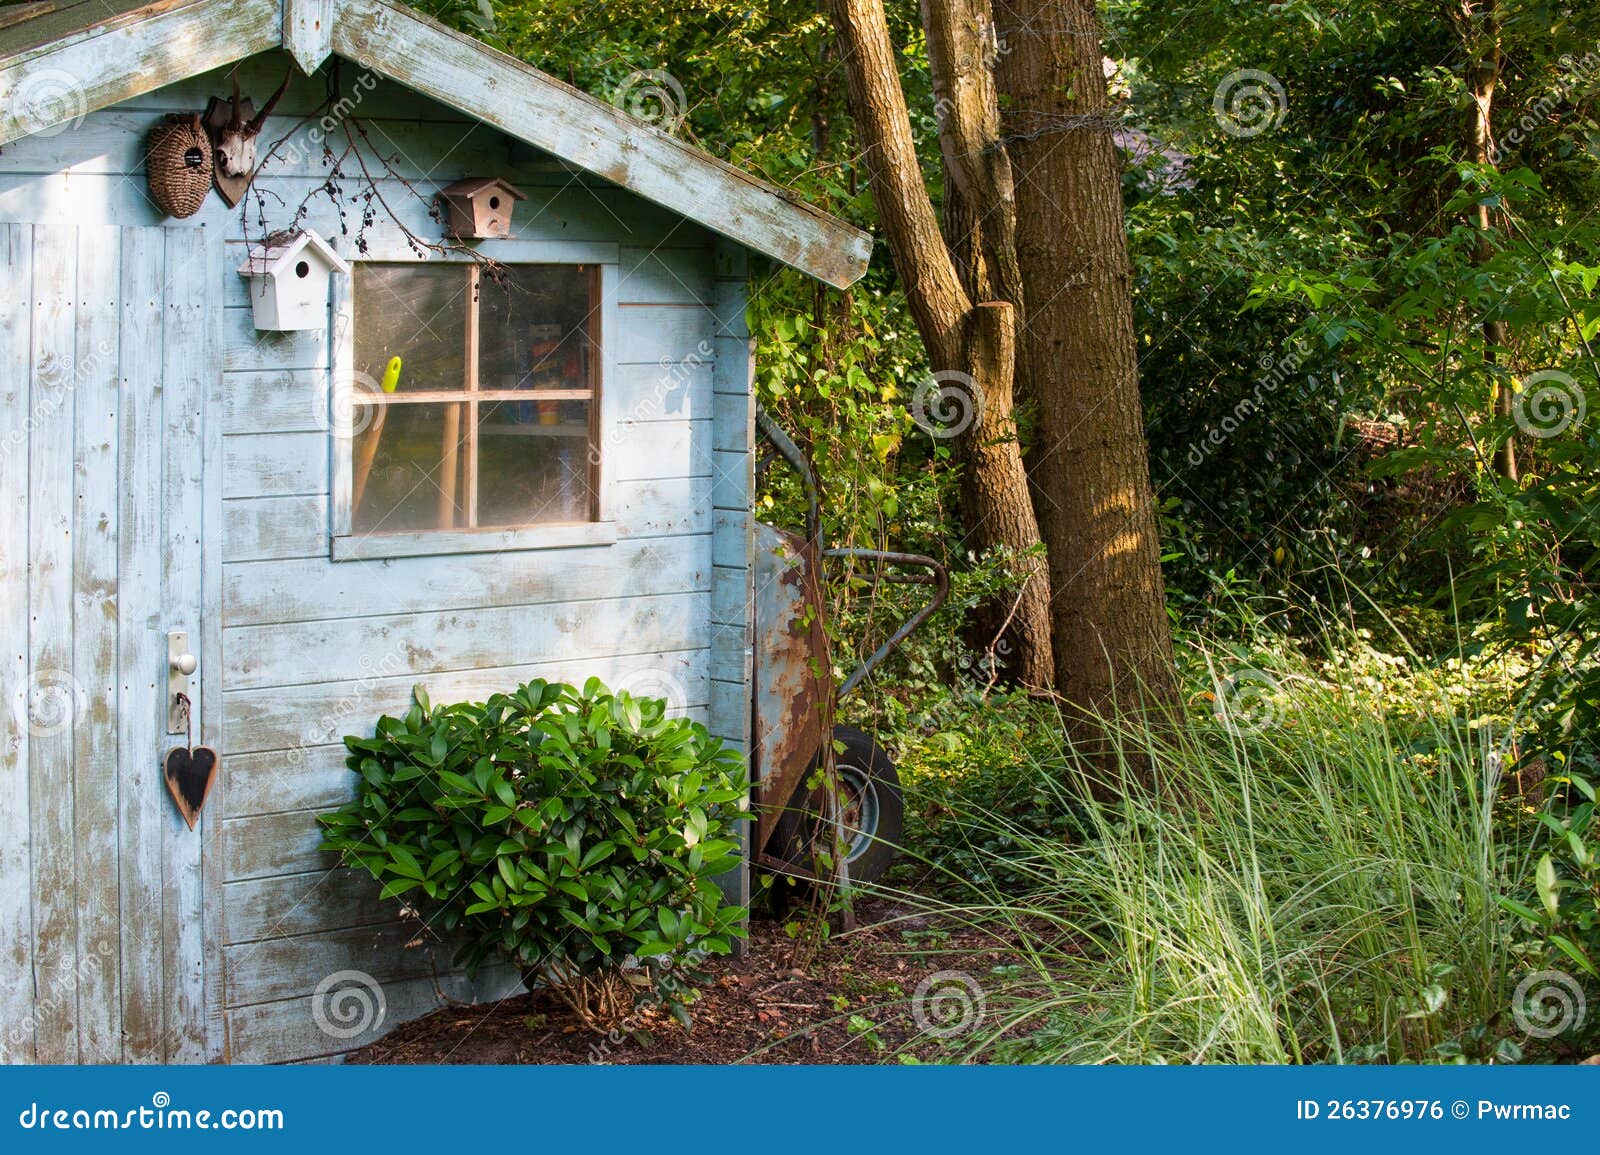 Blue Old Garden Shed Royalty Free Stock Image - Image 